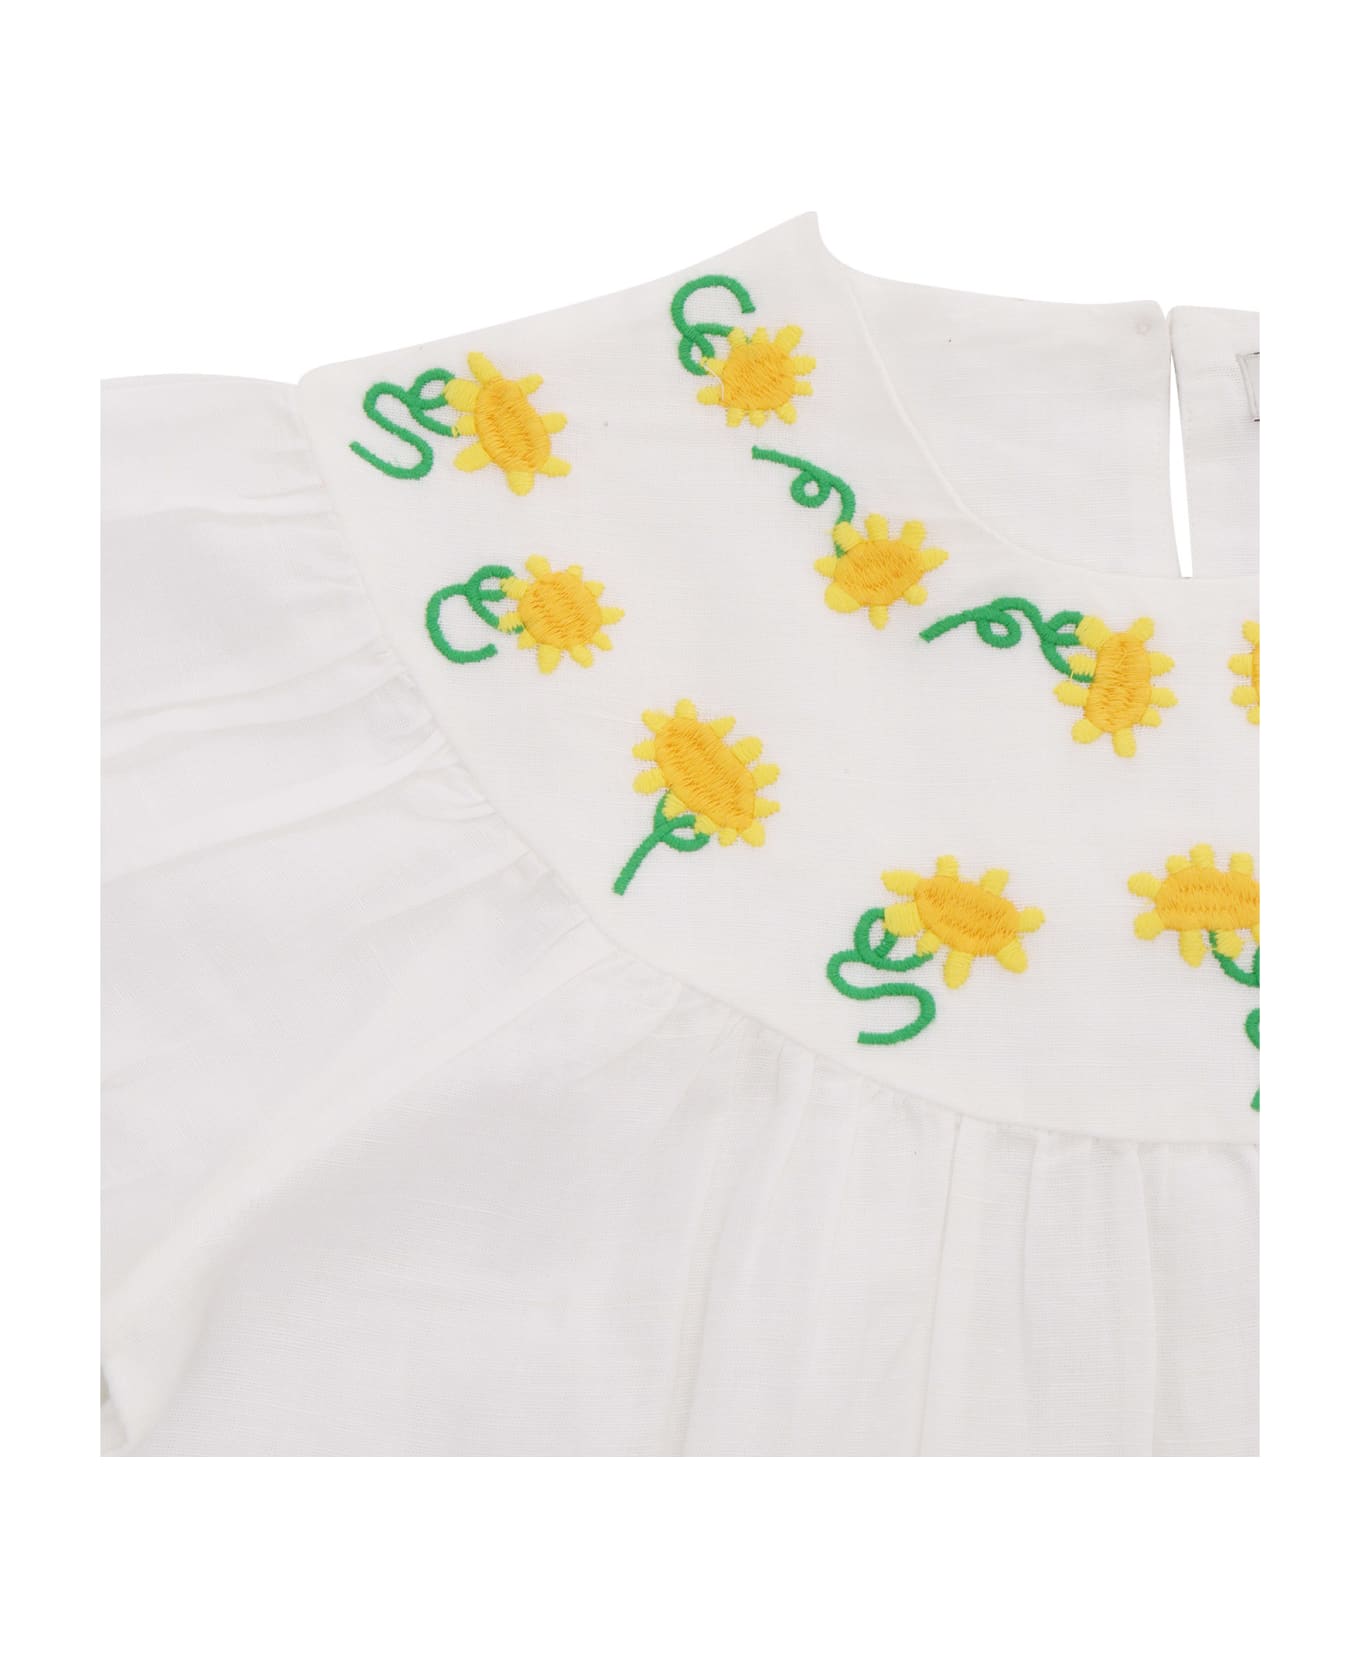 Stella McCartney Kids White Blouse With Flowers - WHITE トップス